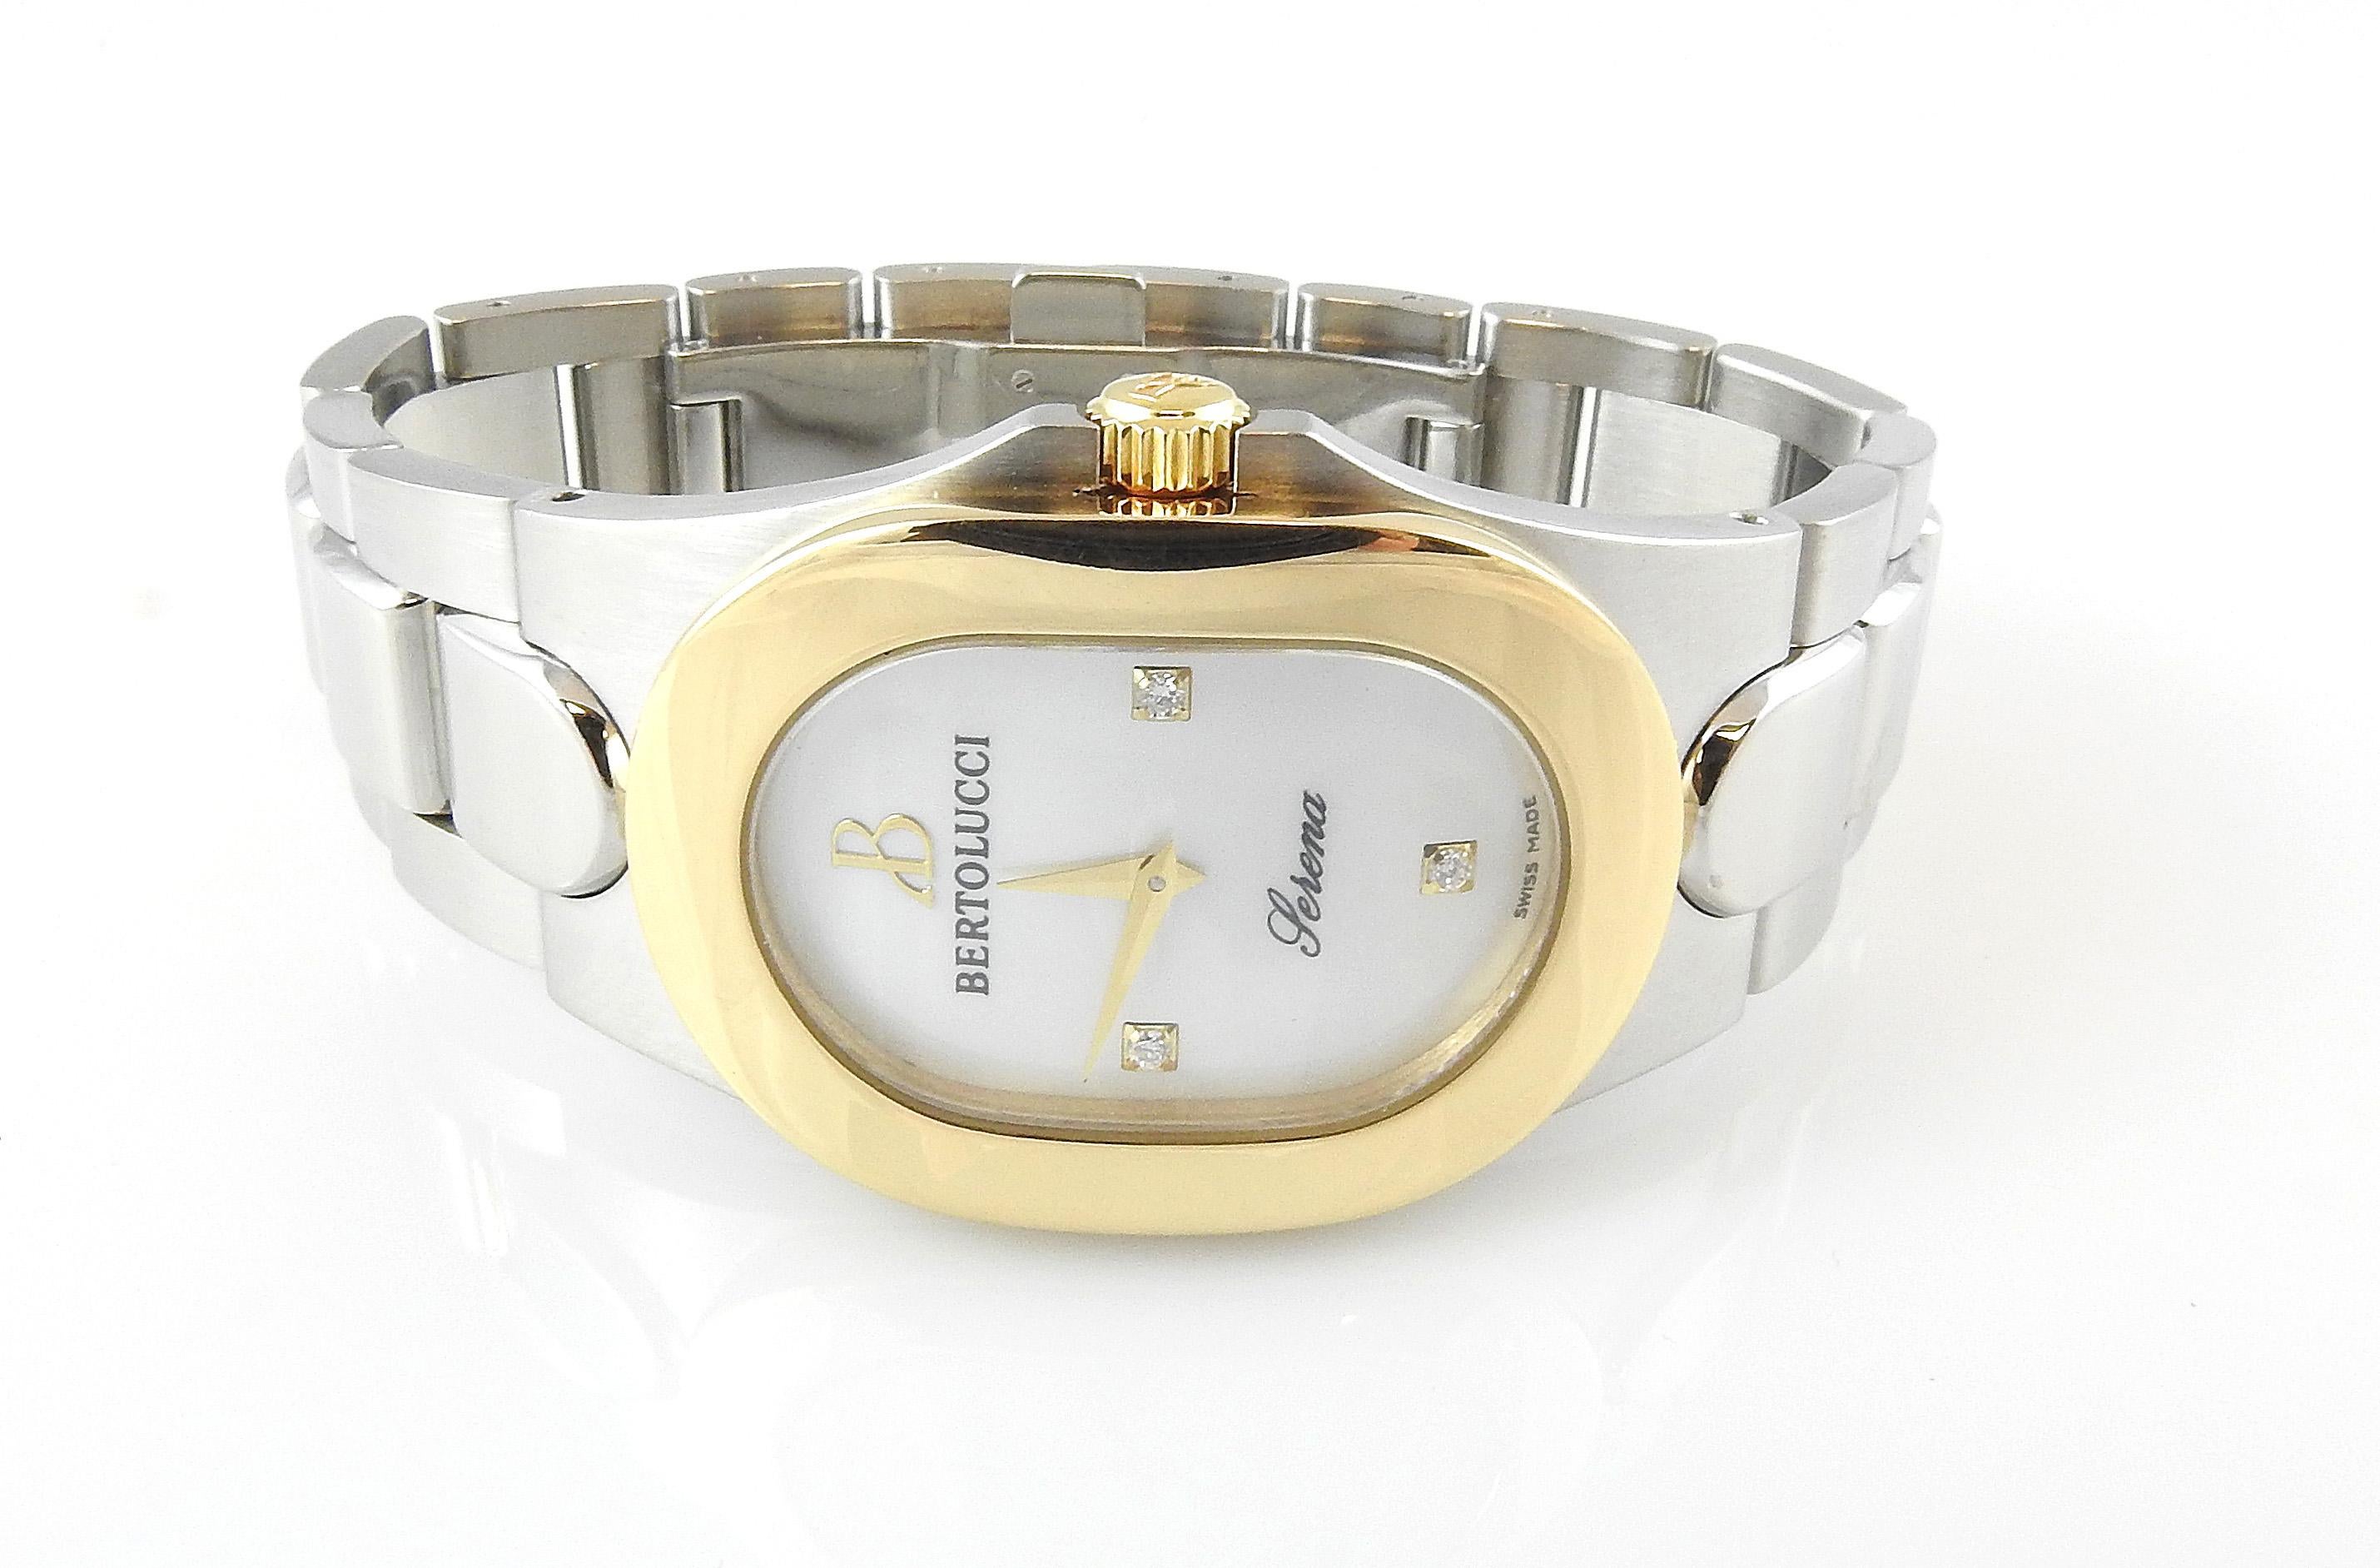 Bertolucci Serena Ladies Watch

Stainless steel case and band with 18K yellow gold bezel and dial

Case is 35mm x 24.5 mm

Mother of Pearl diamond dial.

Fits up to 6